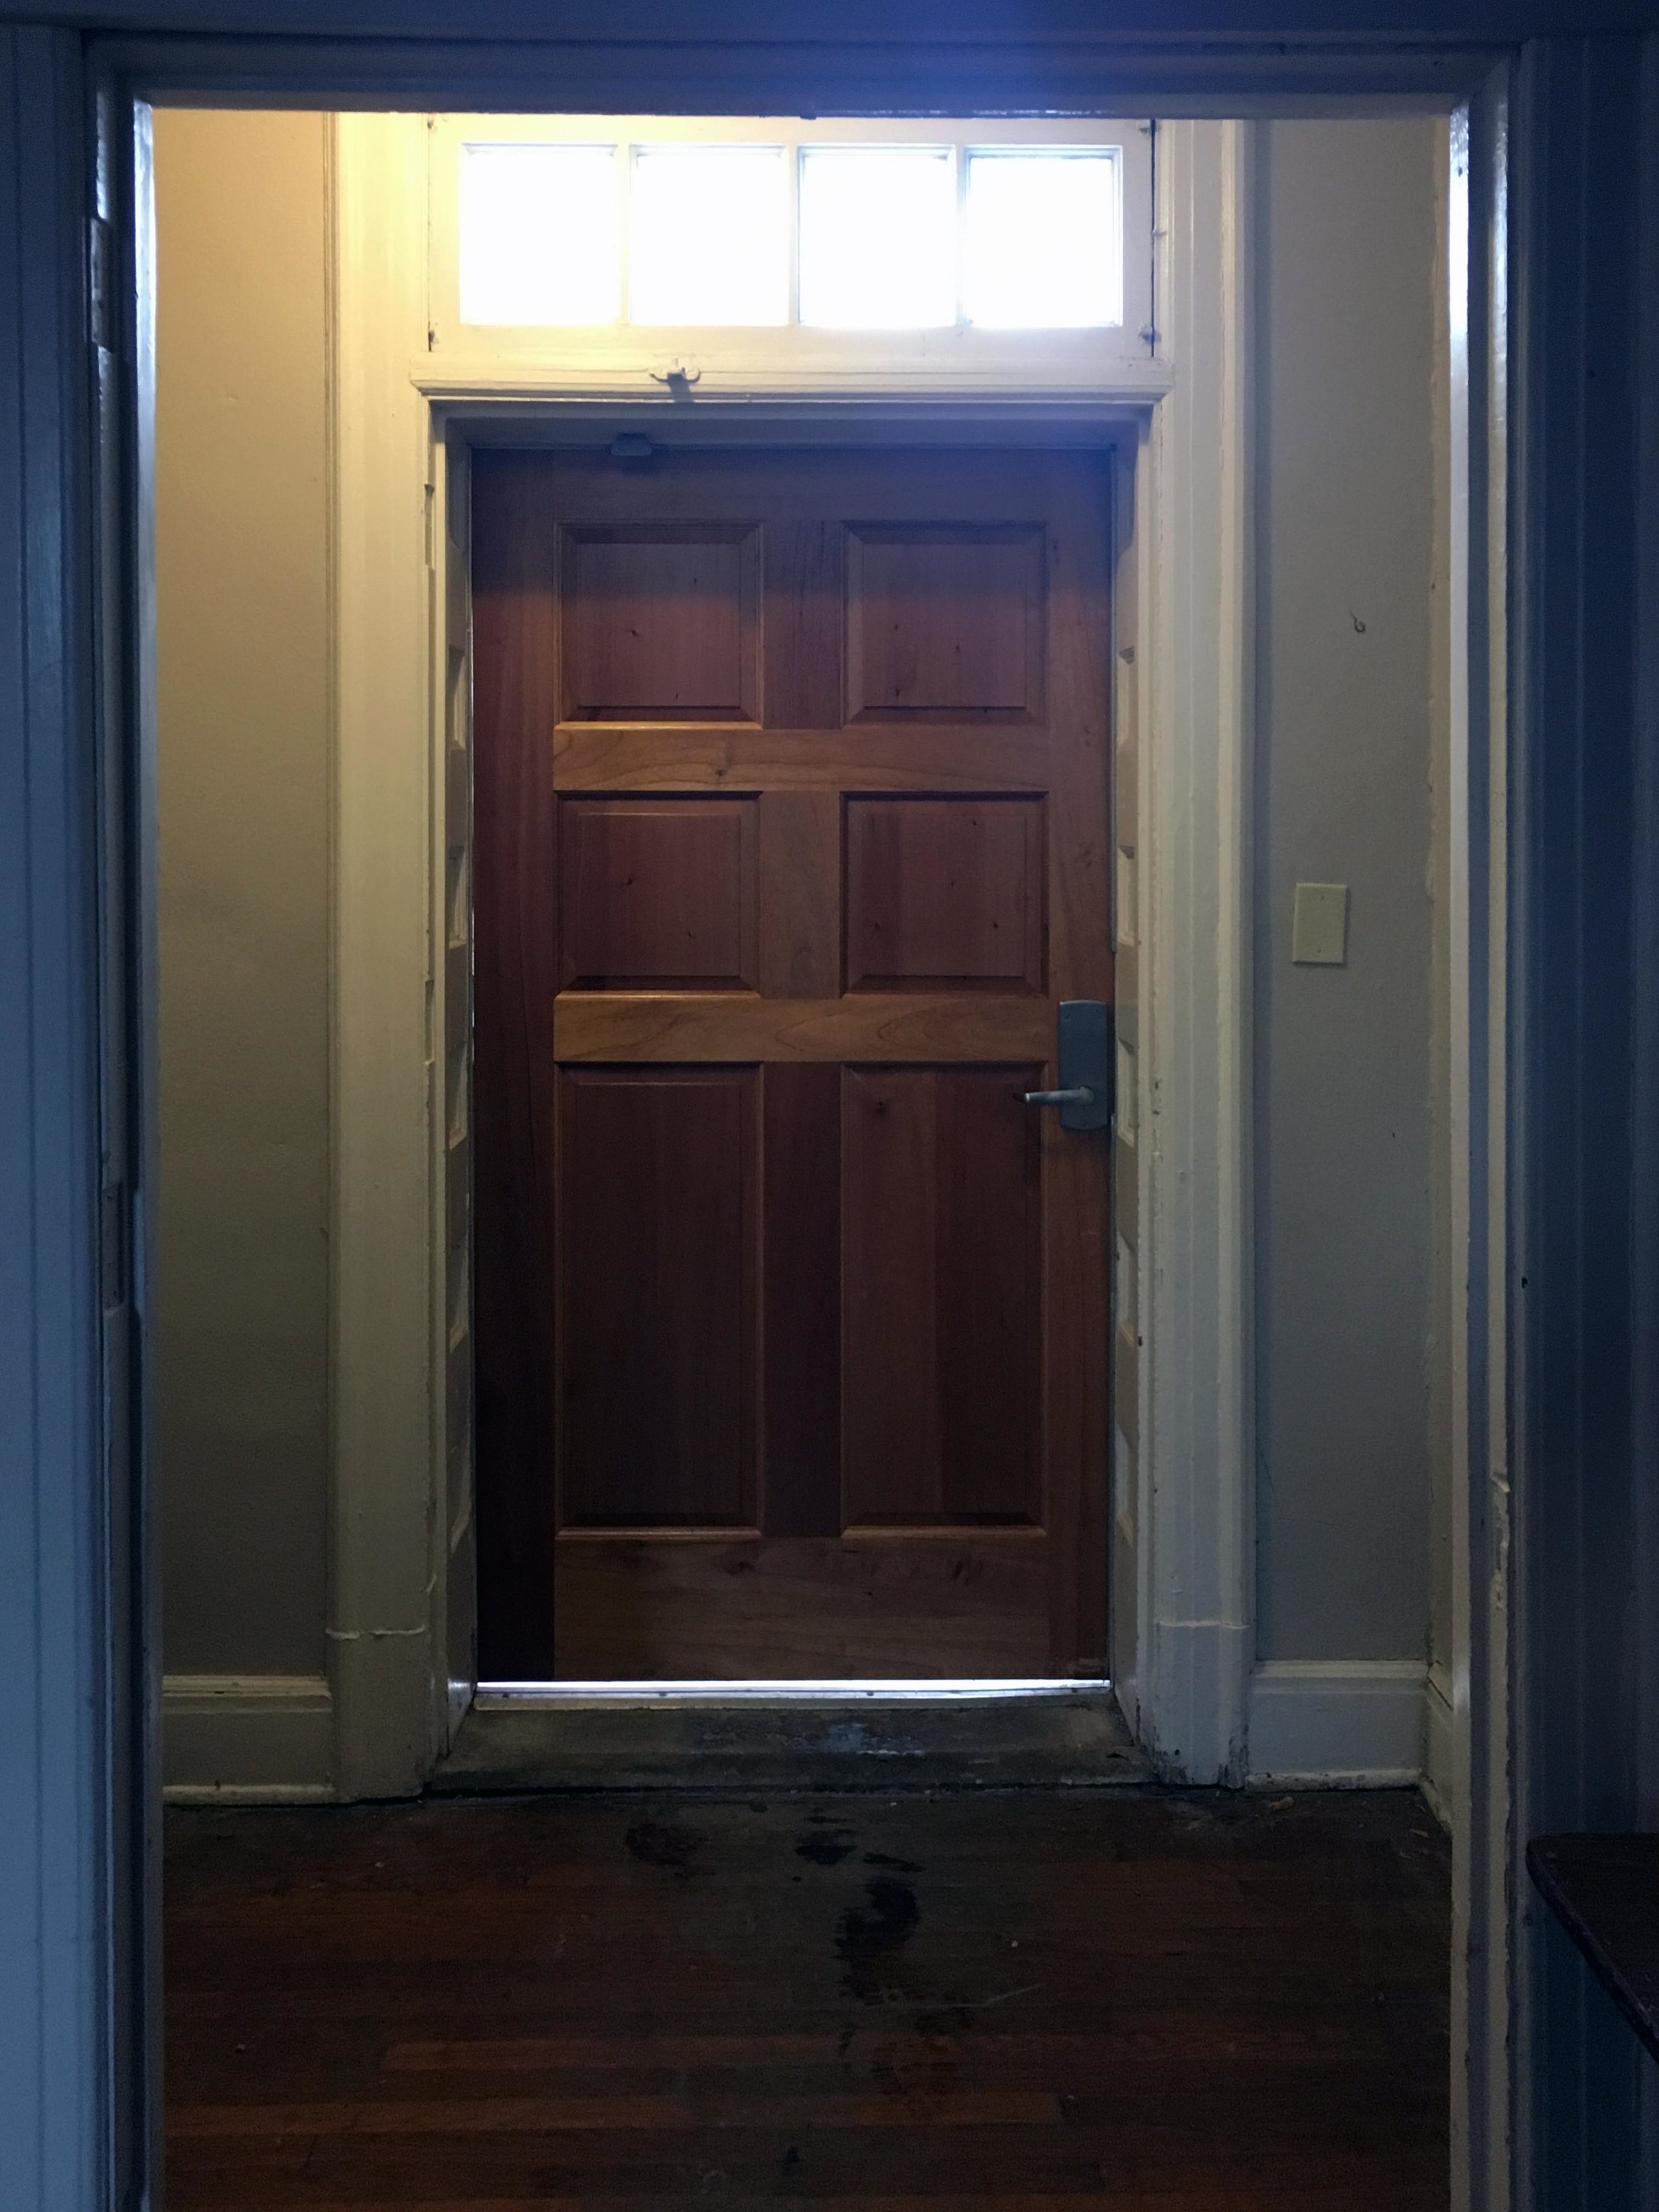  Spring 2017 - New Front Door to Chapter House 